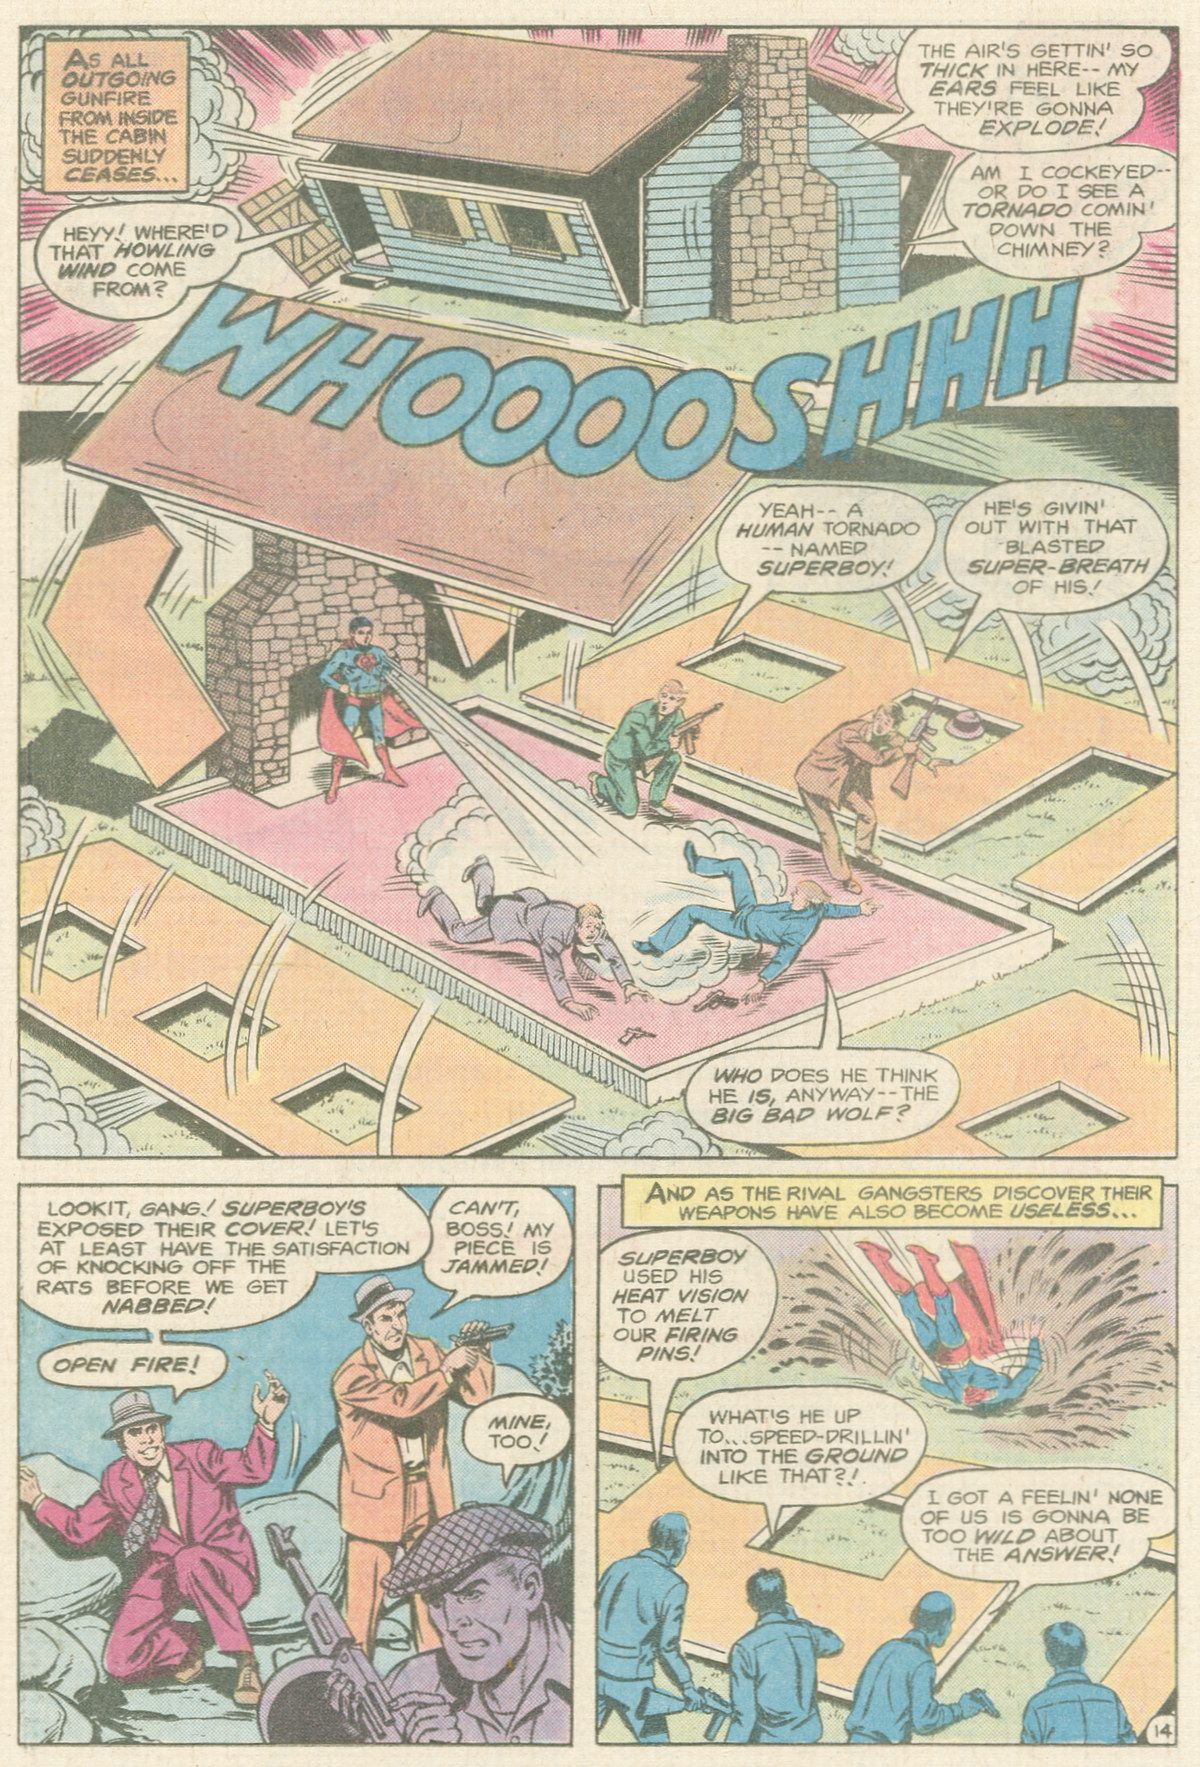 The New Adventures of Superboy 13 Page 14